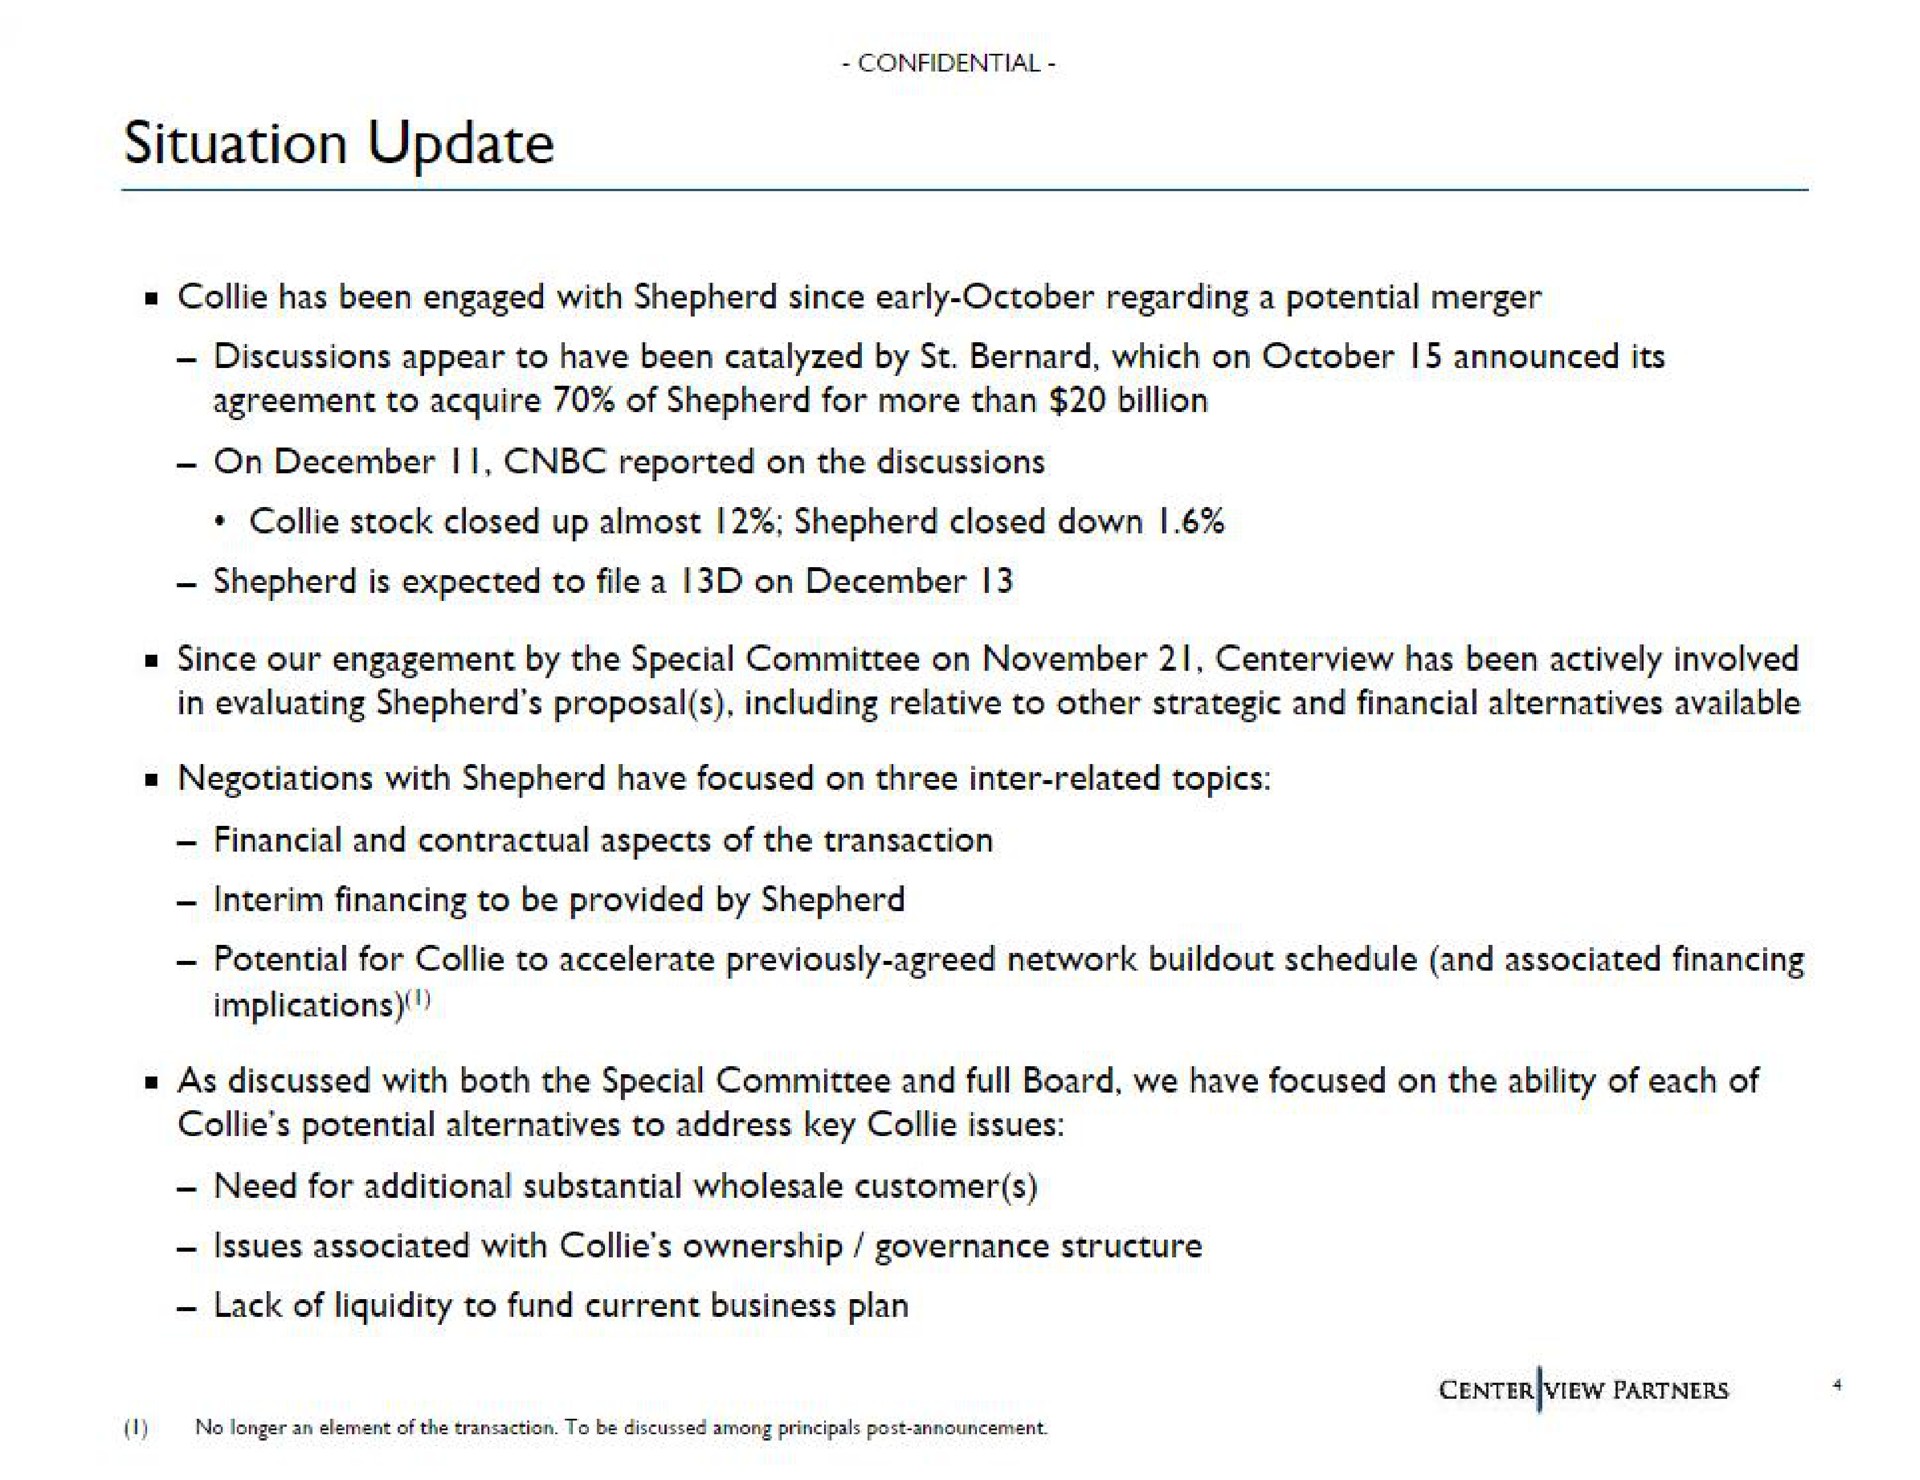 situation update | Centerview Partners